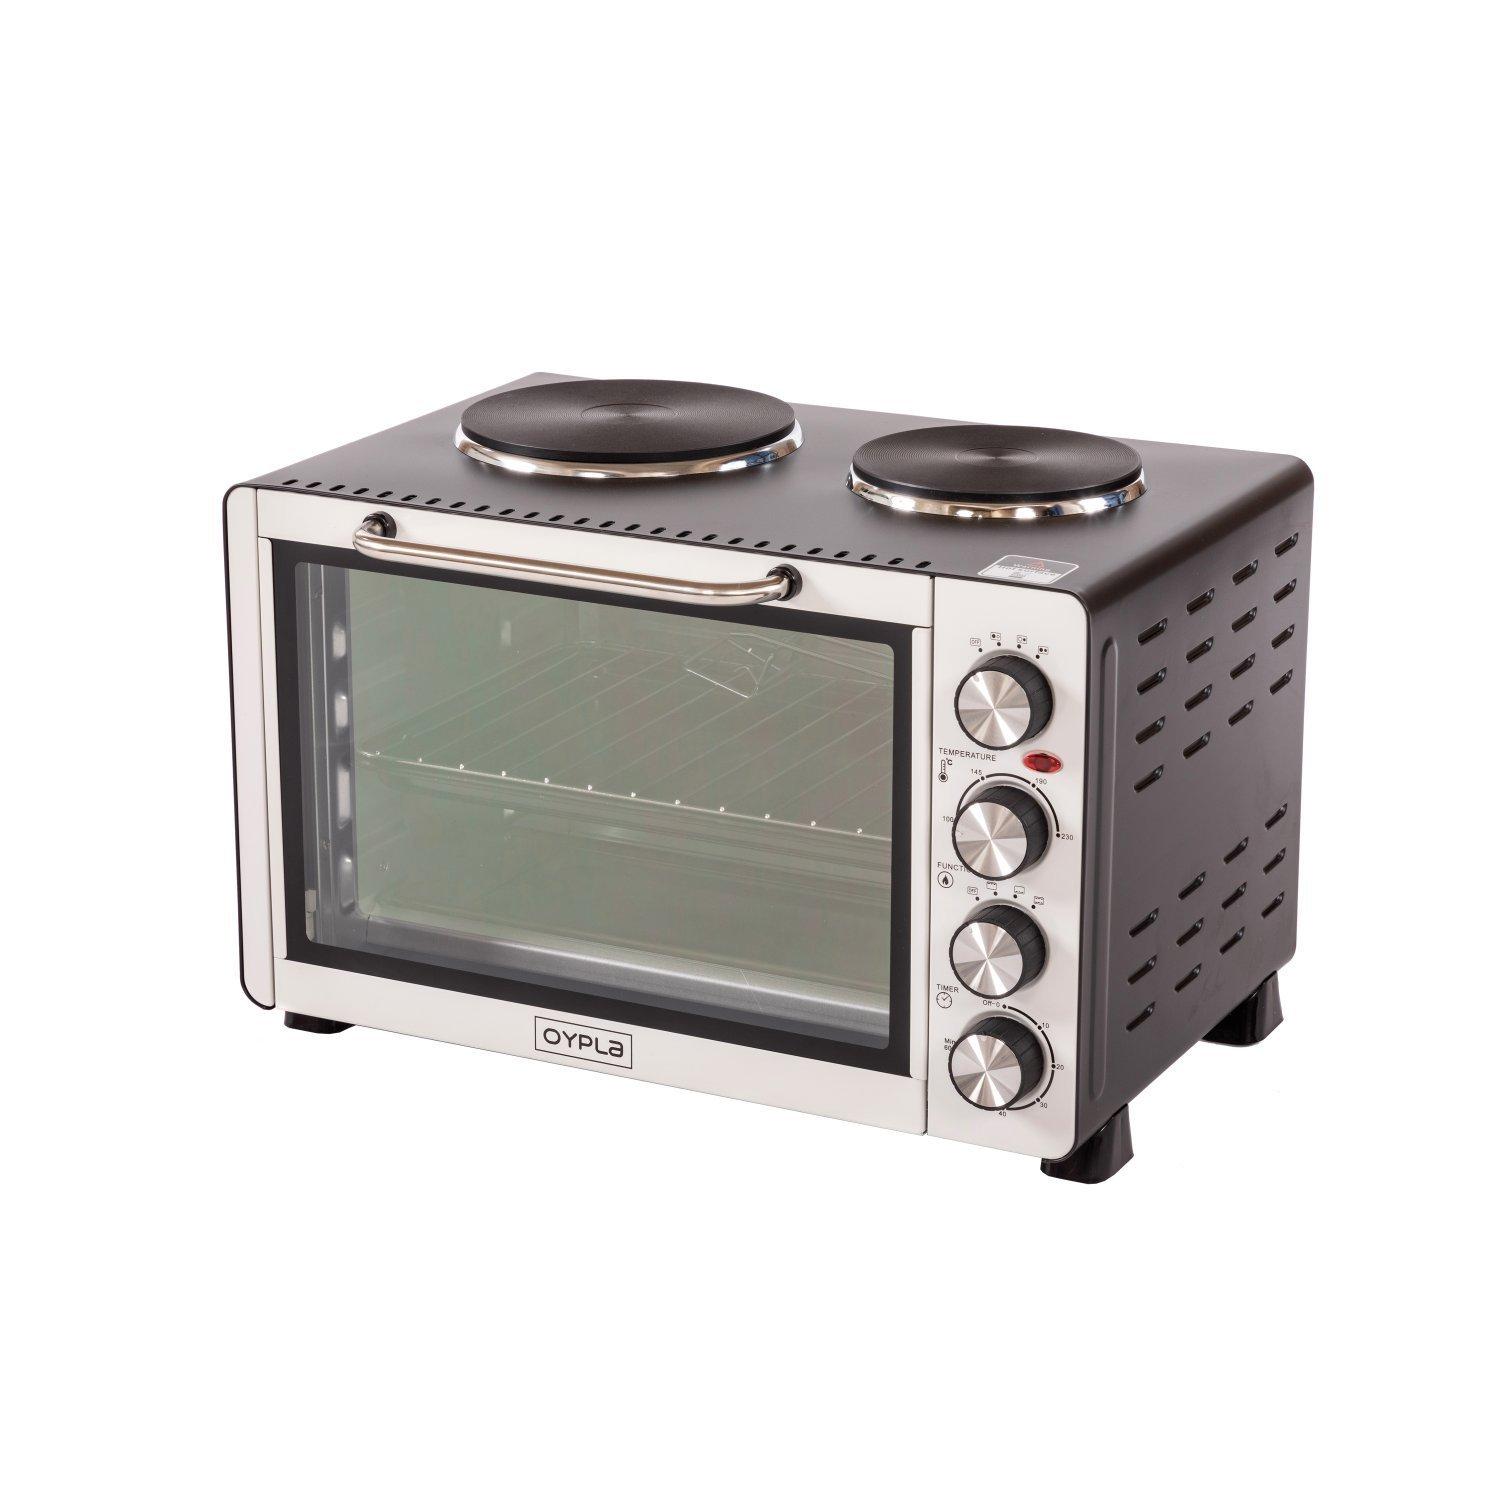 30L Electrical Mini Oven with 2 Hot Plates, Timer And Grill